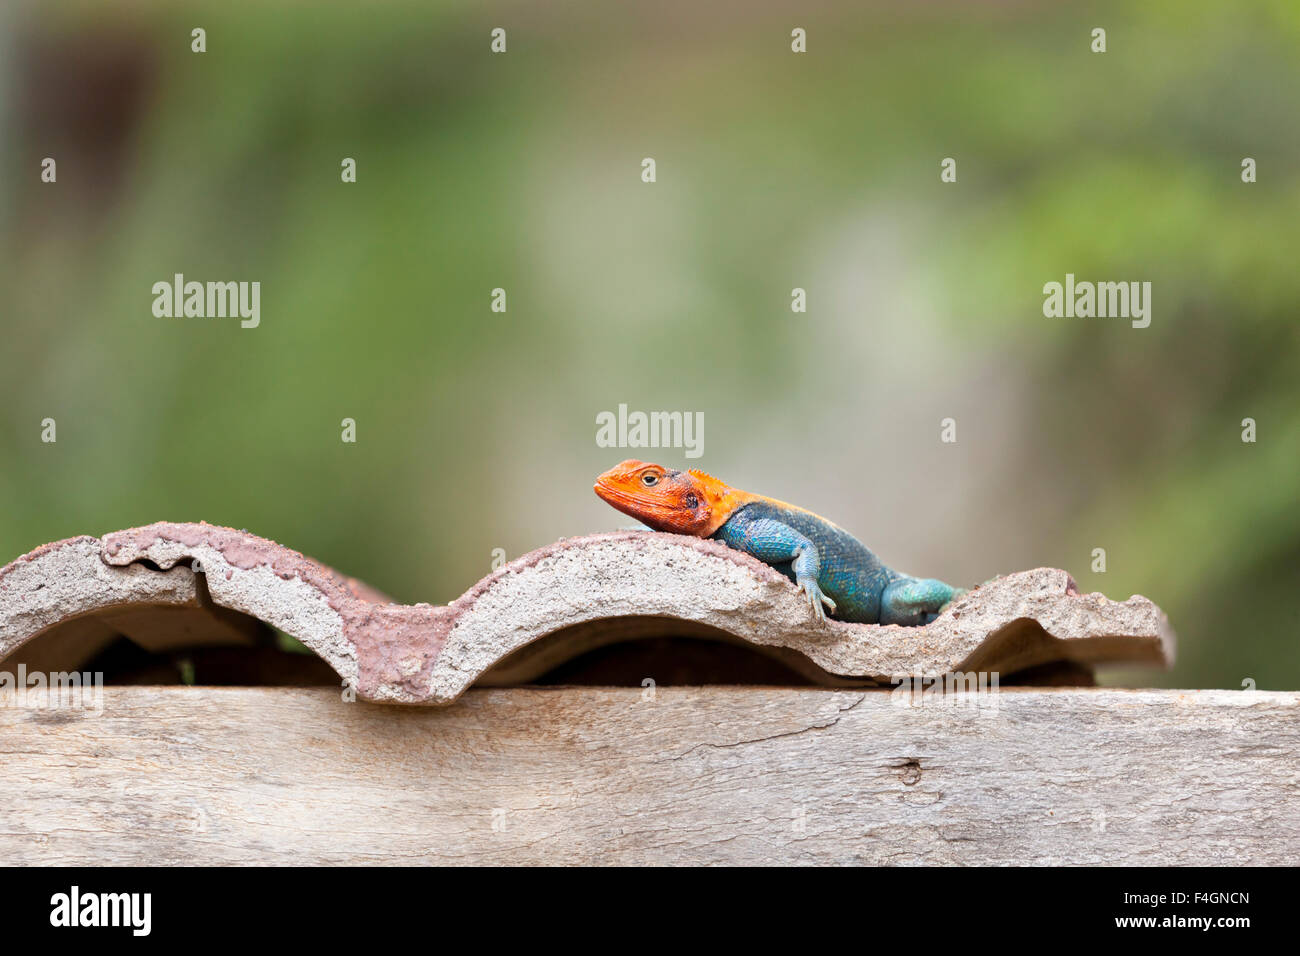 A Red-headed Rock Agama in Tsavo East National Park in Kenya Stock Photo